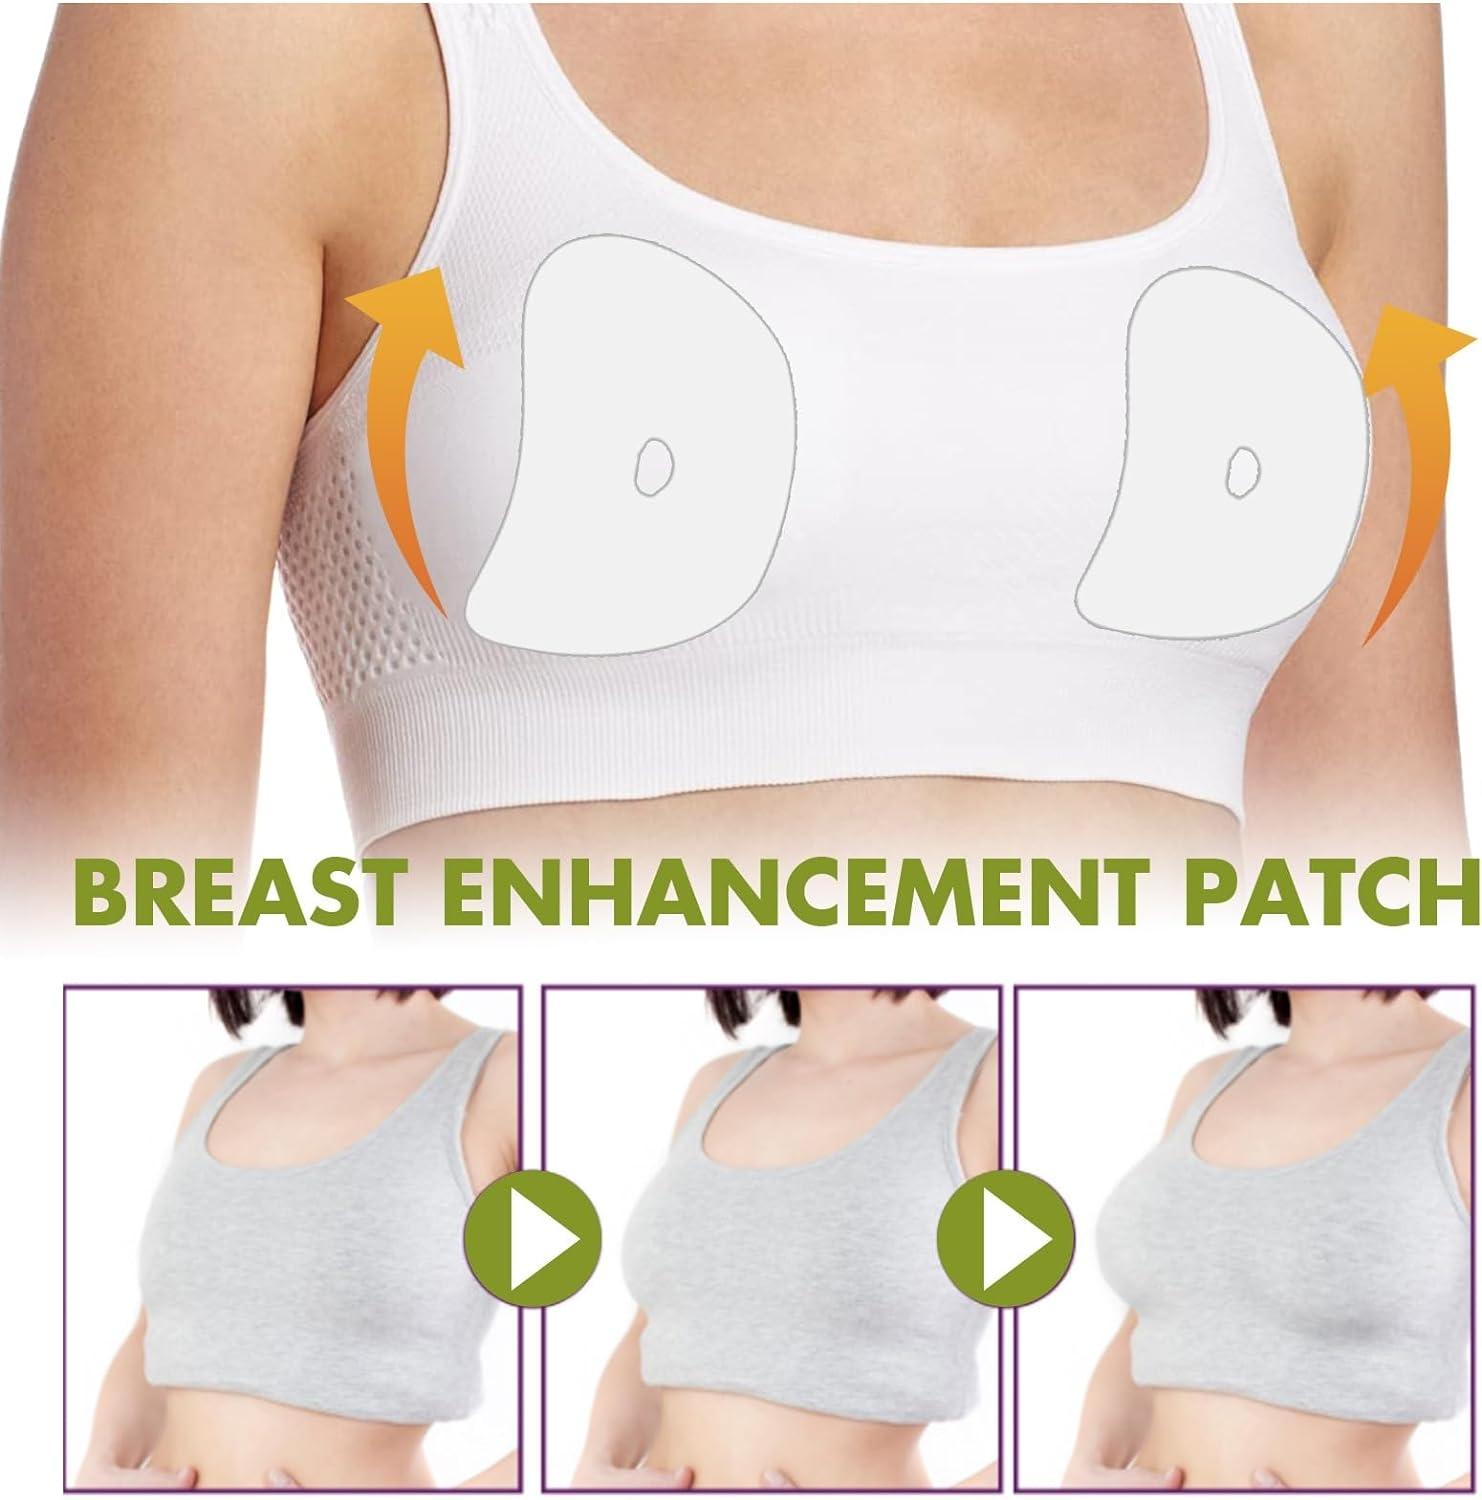  Breast Enhancement Upright Lifter Enlarger Patch, Breast  Enhancement Patches, Breast Upright Lifter Enlarger Patch (5box) :  Clothing, Shoes & Jewelry